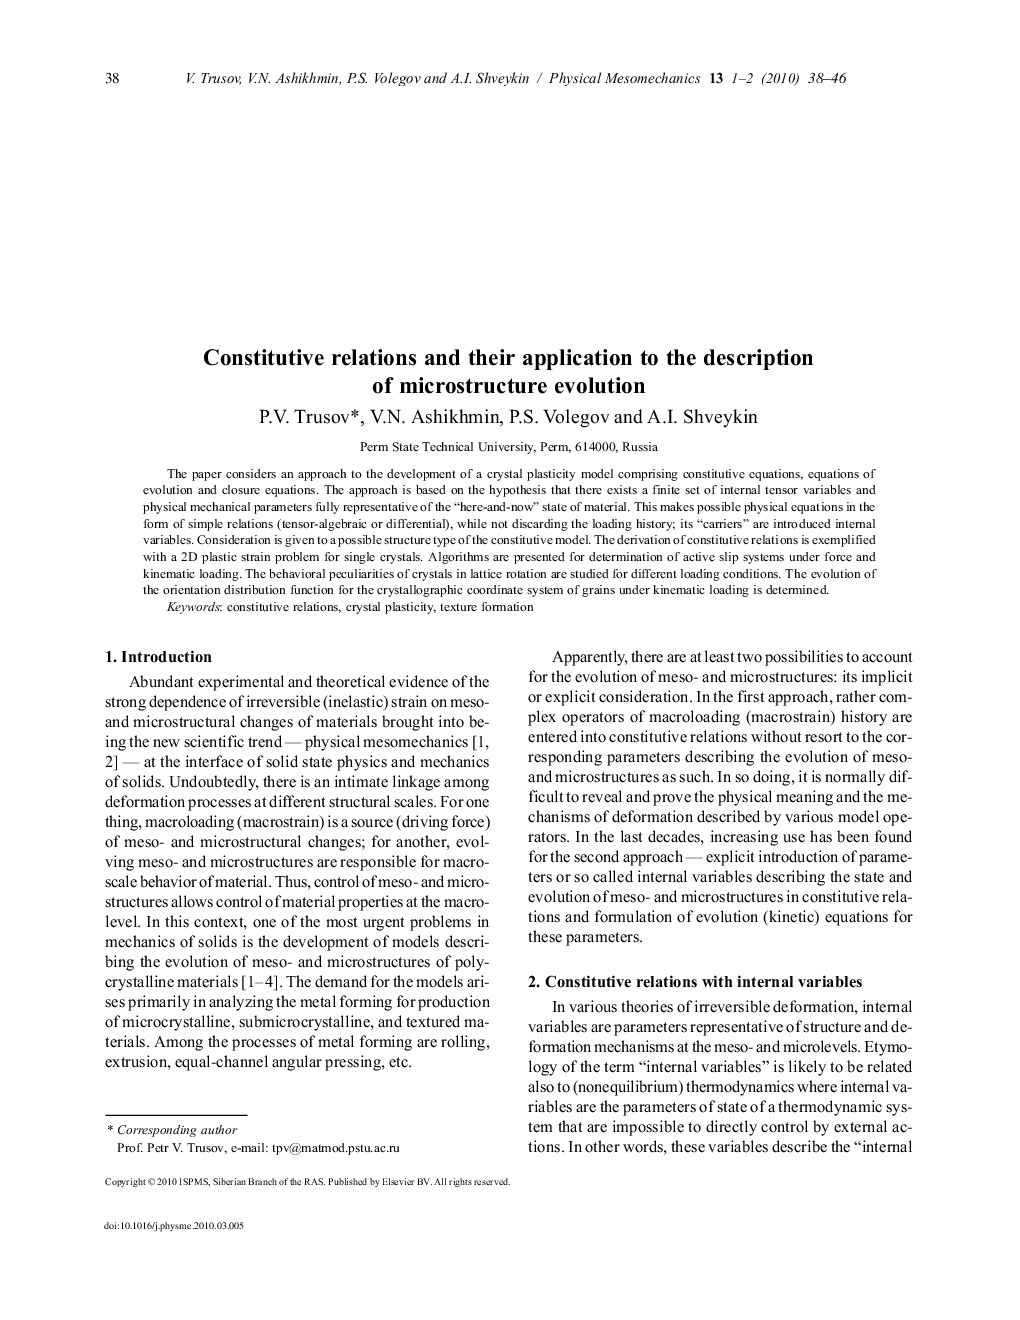 Constitutive relations and their application to the description of microstructure evolution